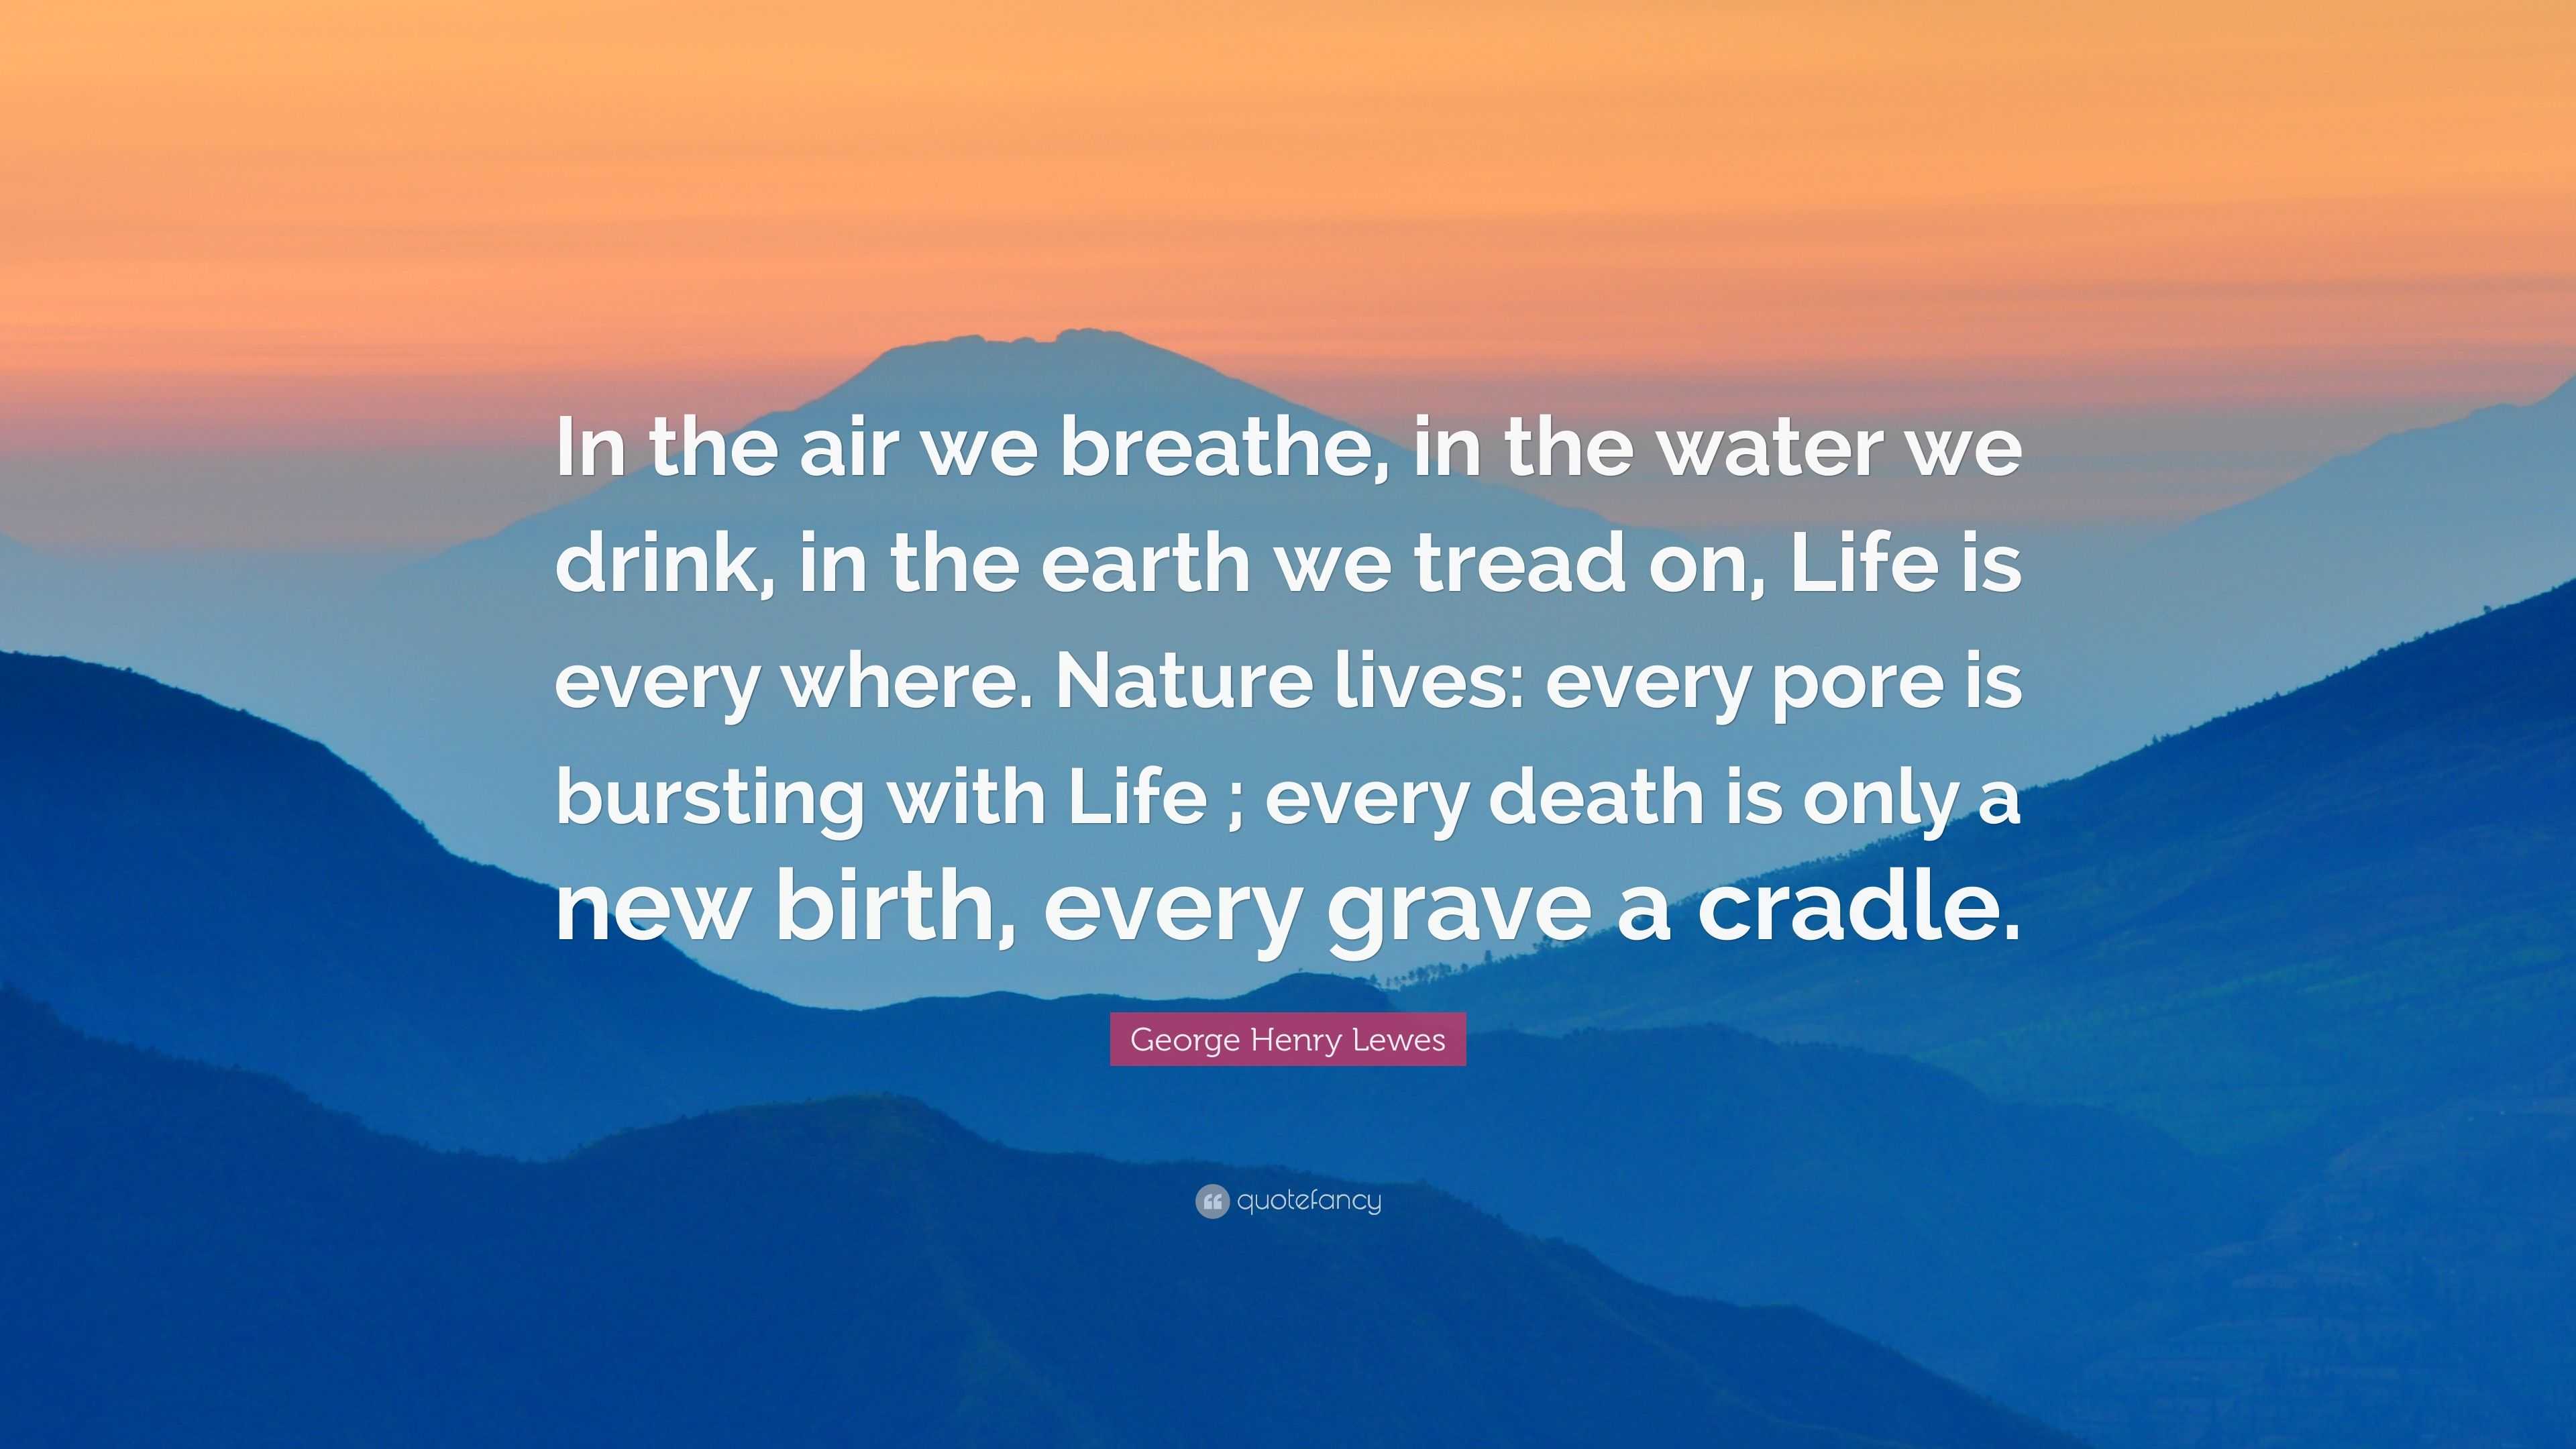 George Henry Lewes Quote “In the air we breathe in the water we